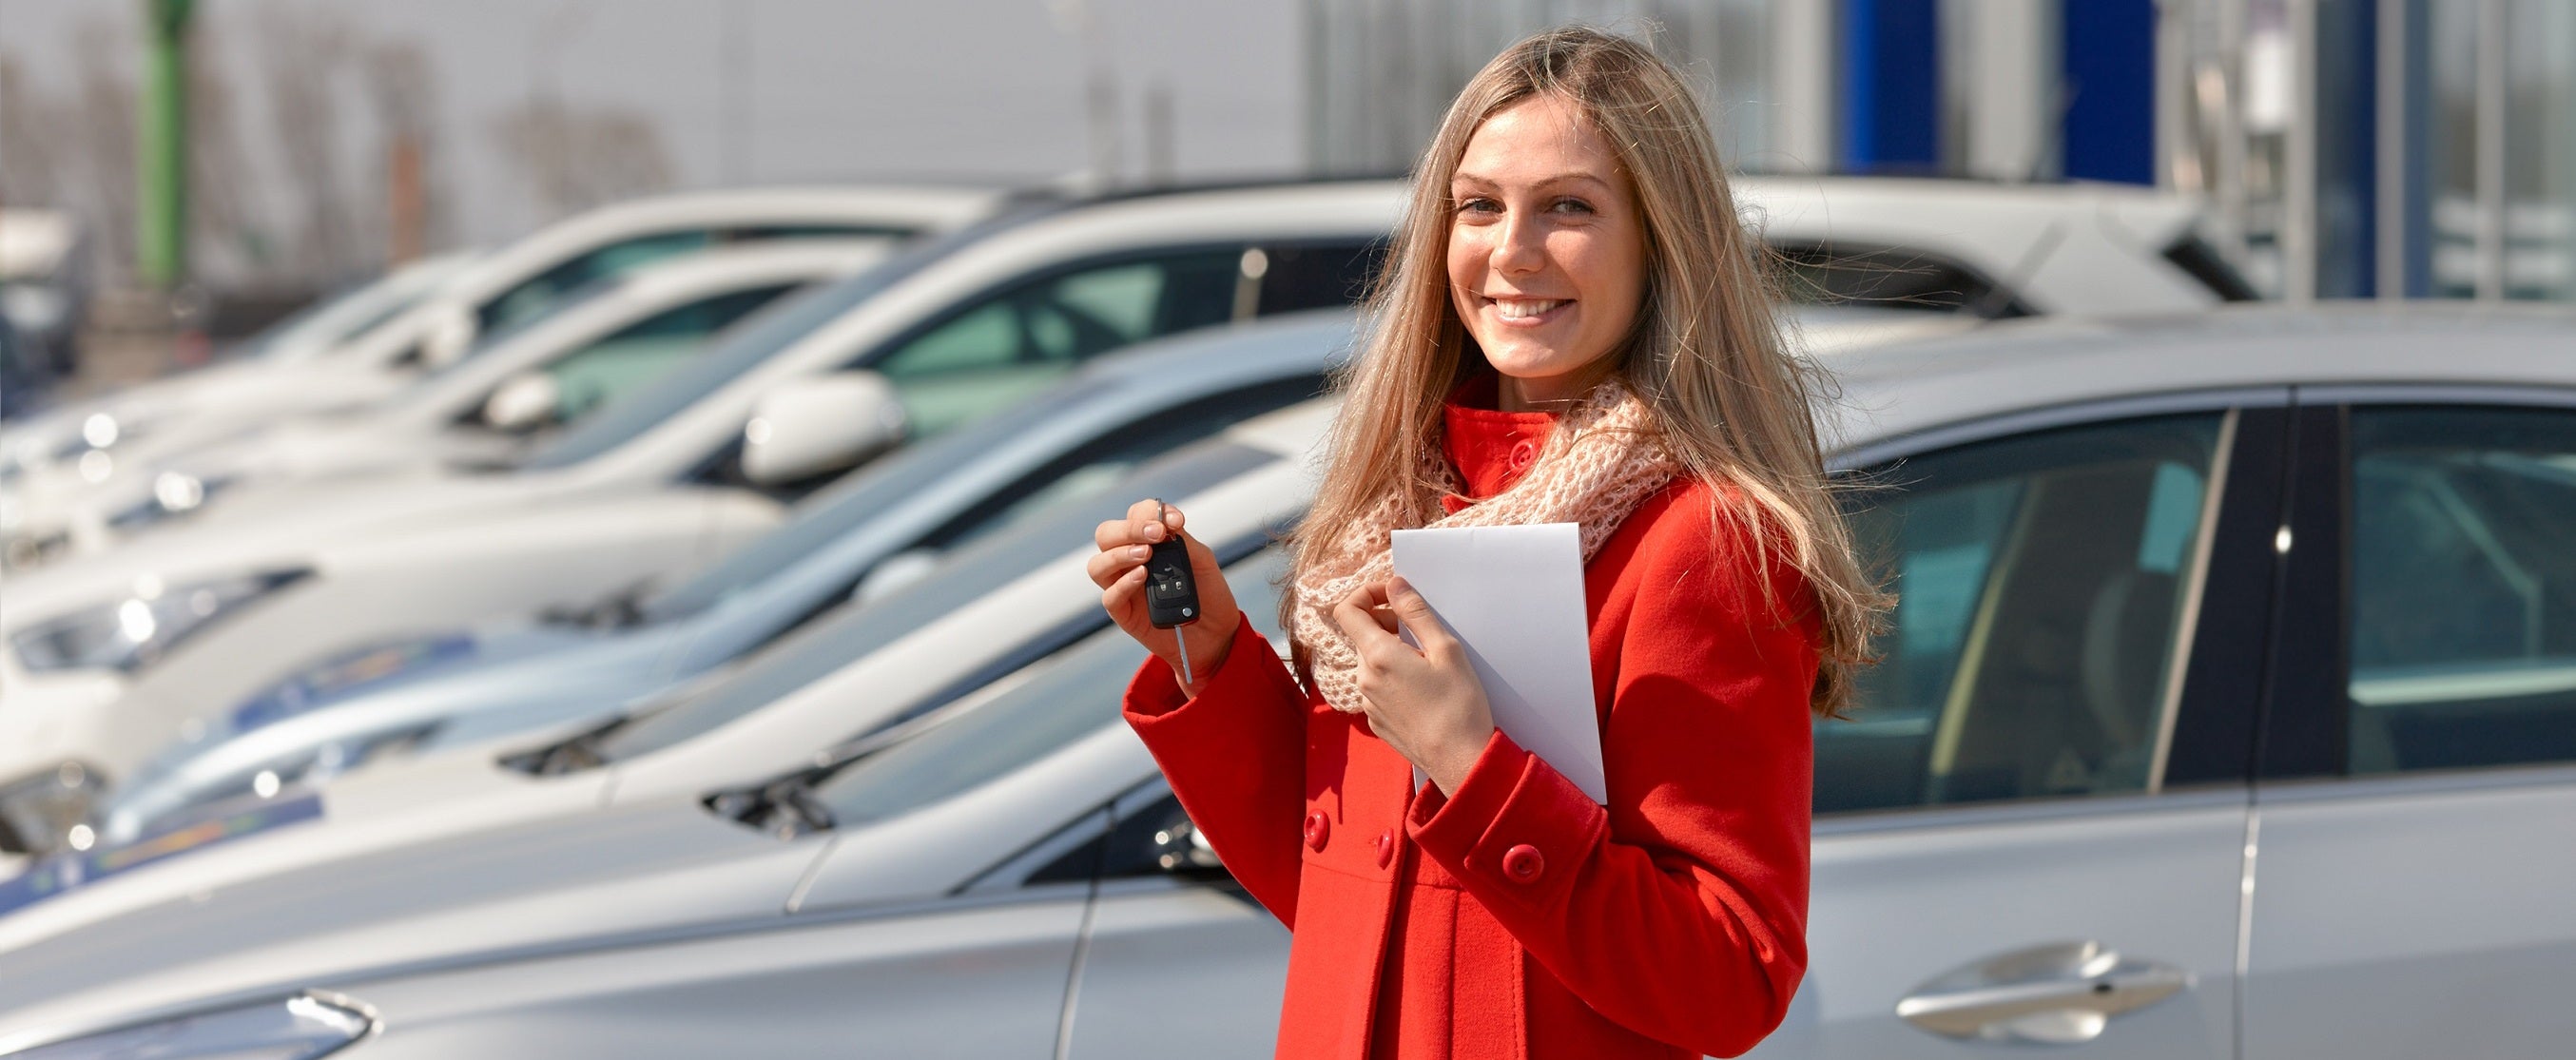 A woman in a red coat showing off the keys to her brand new car 